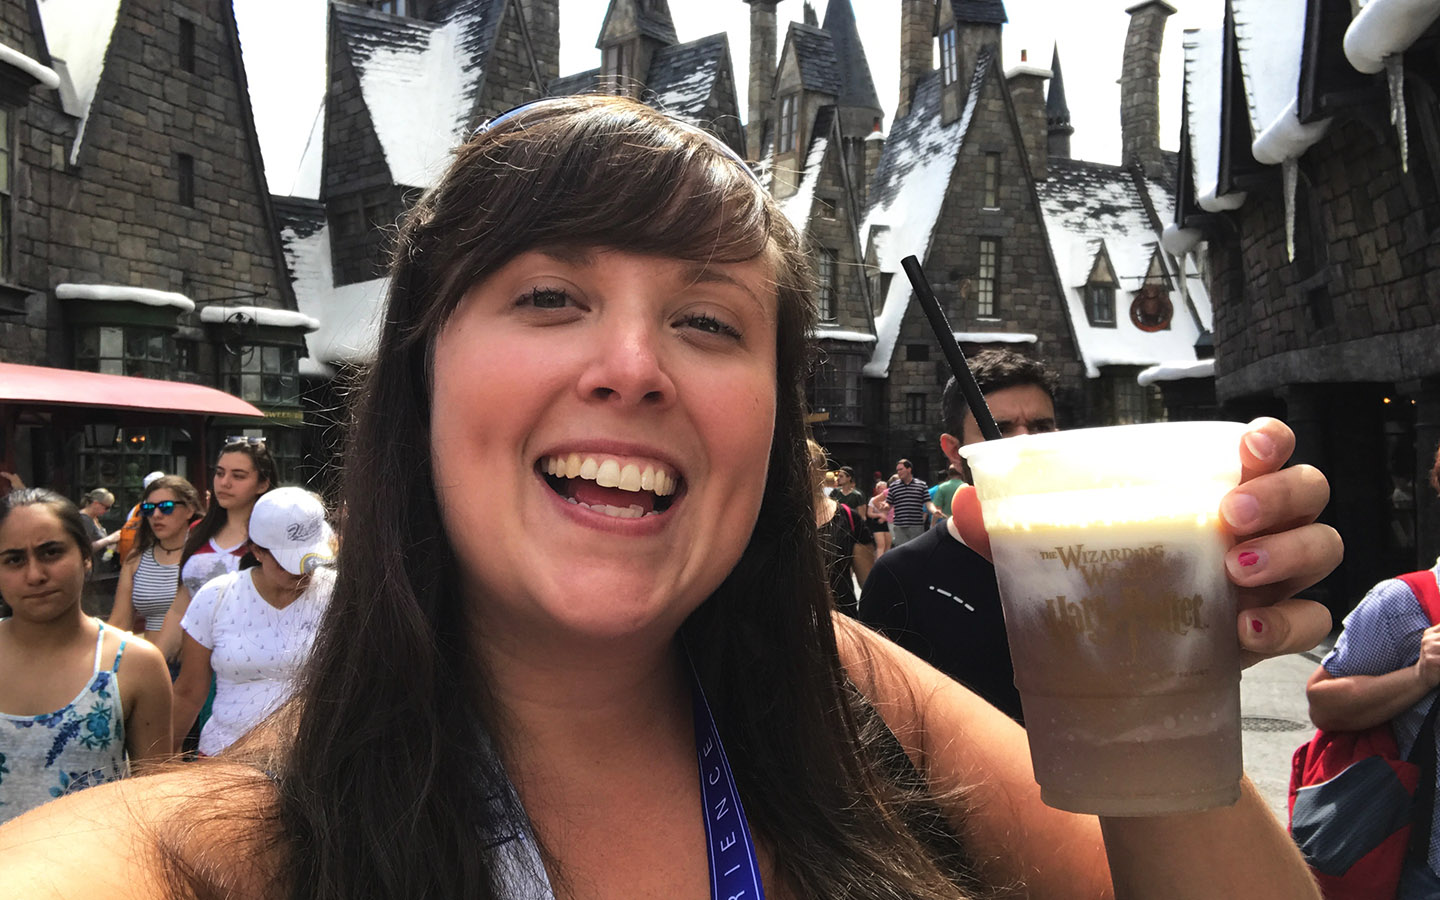 Drink a cold Butterbeer in The Wizarding World of Harry Potter at Universal Orlando Resort.